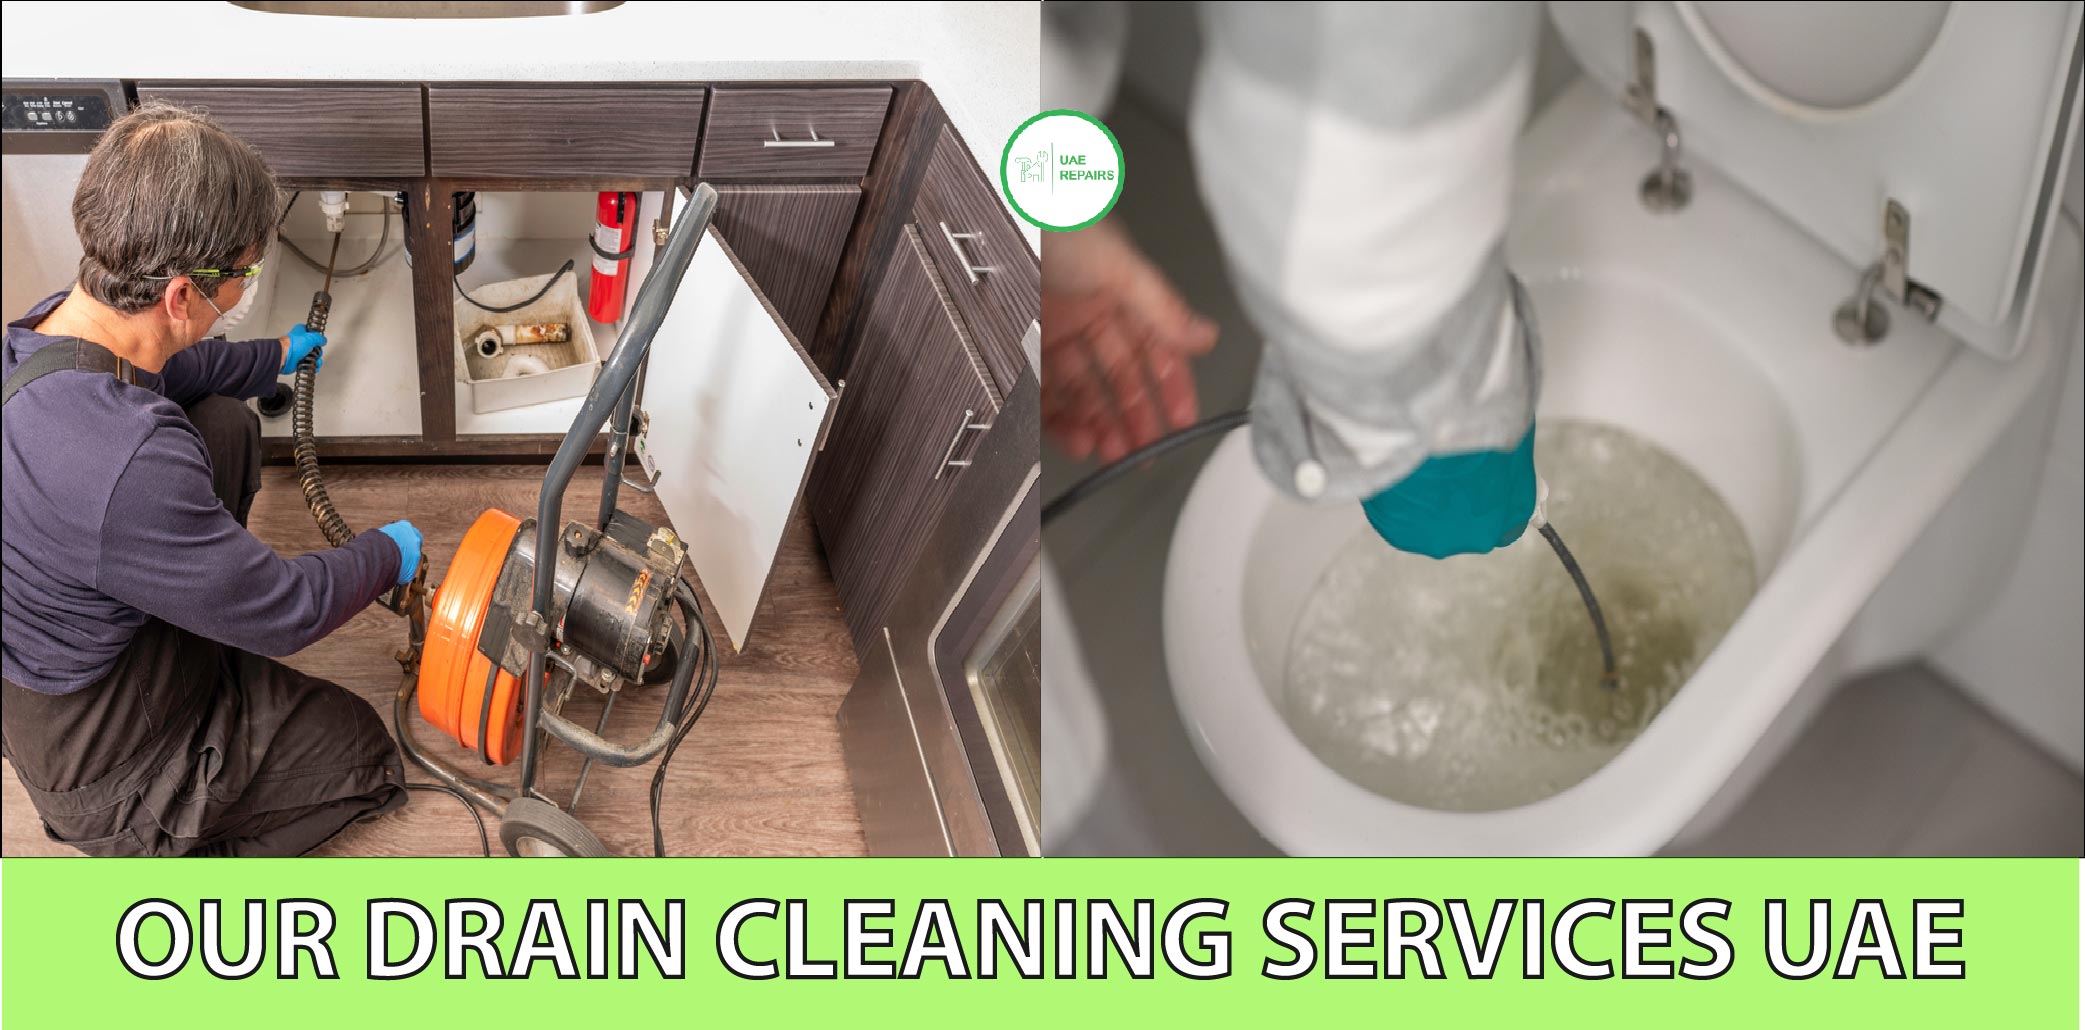 TOLIET DRAIN CLEANING KITCHEN DRAIN CLEANING SEWERAGE DRAIN CLEANING SEWER LINE DRAIN CLEANING